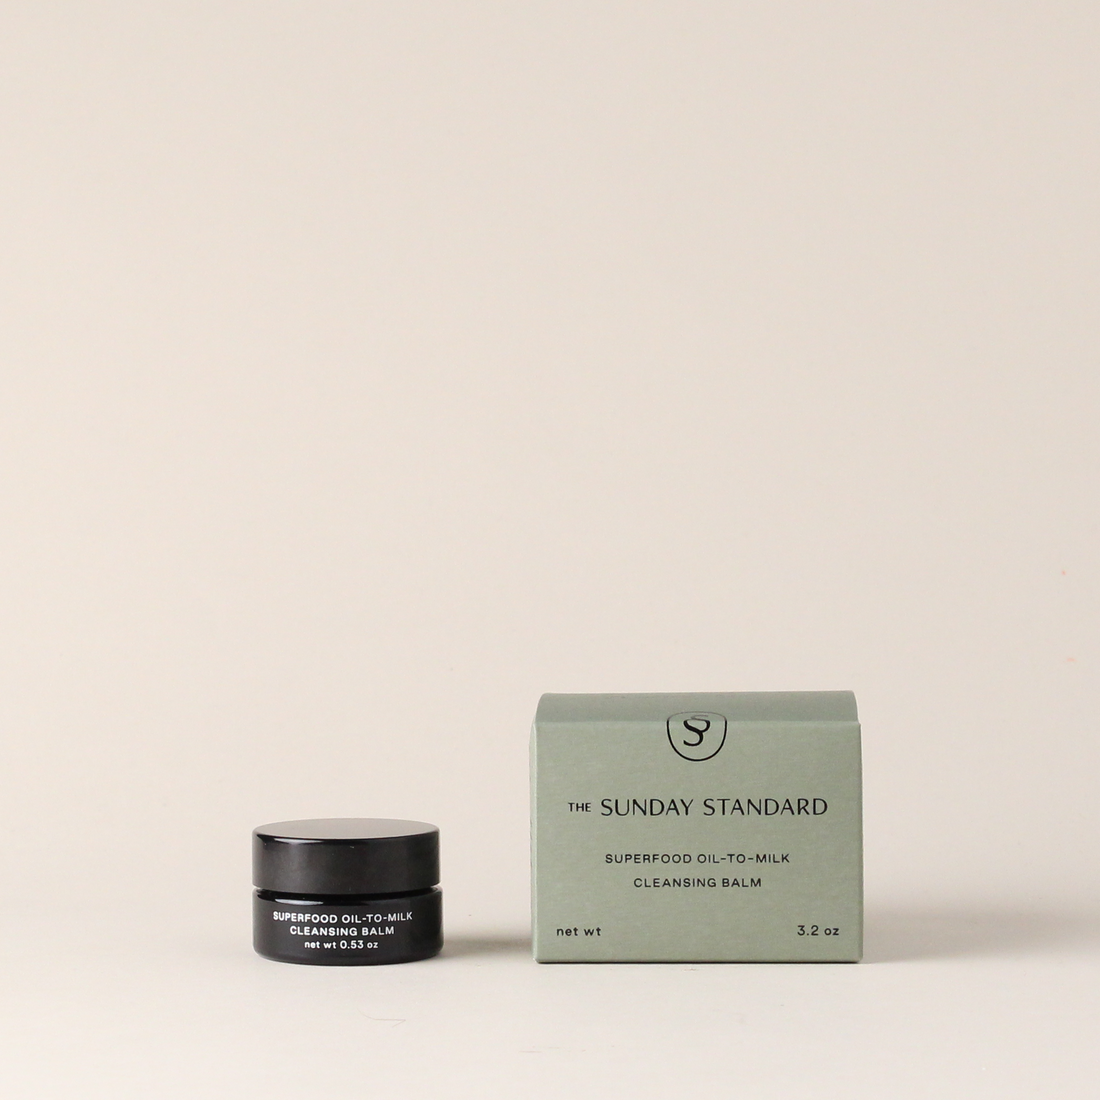 Superfood Cleansing Balm a Natural Facial Cleanser for Acne Prone Skin